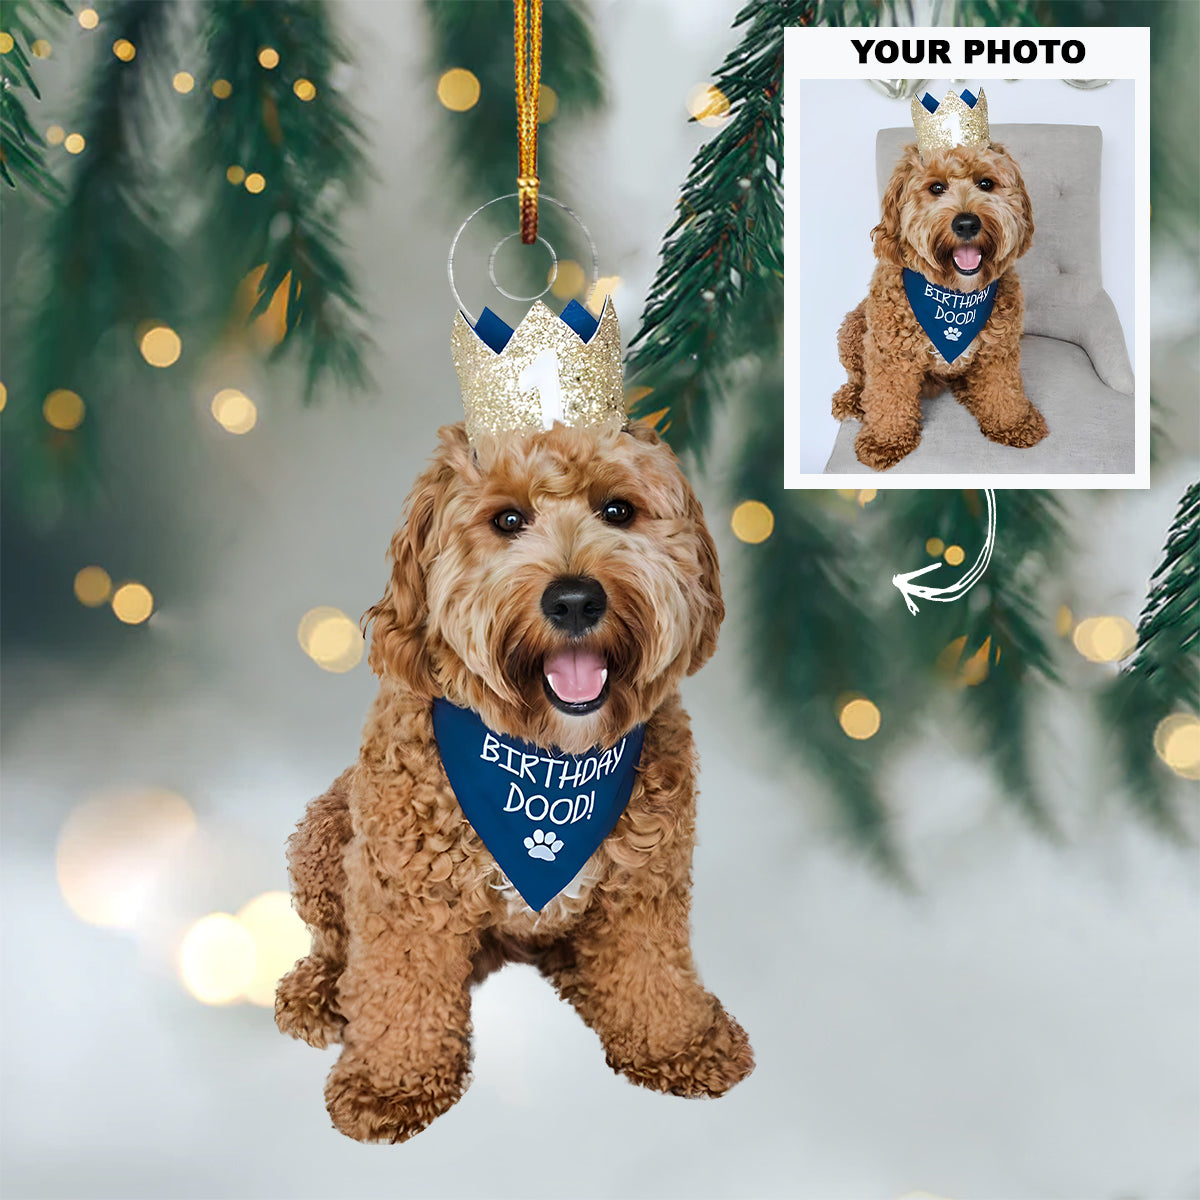 Pet's Birthday - Personalized Custom Photo Mica Ornament - Christmas Gift For Pet Lovers, Animal Lovers, Pet Owner, Friends, Family, Family Members